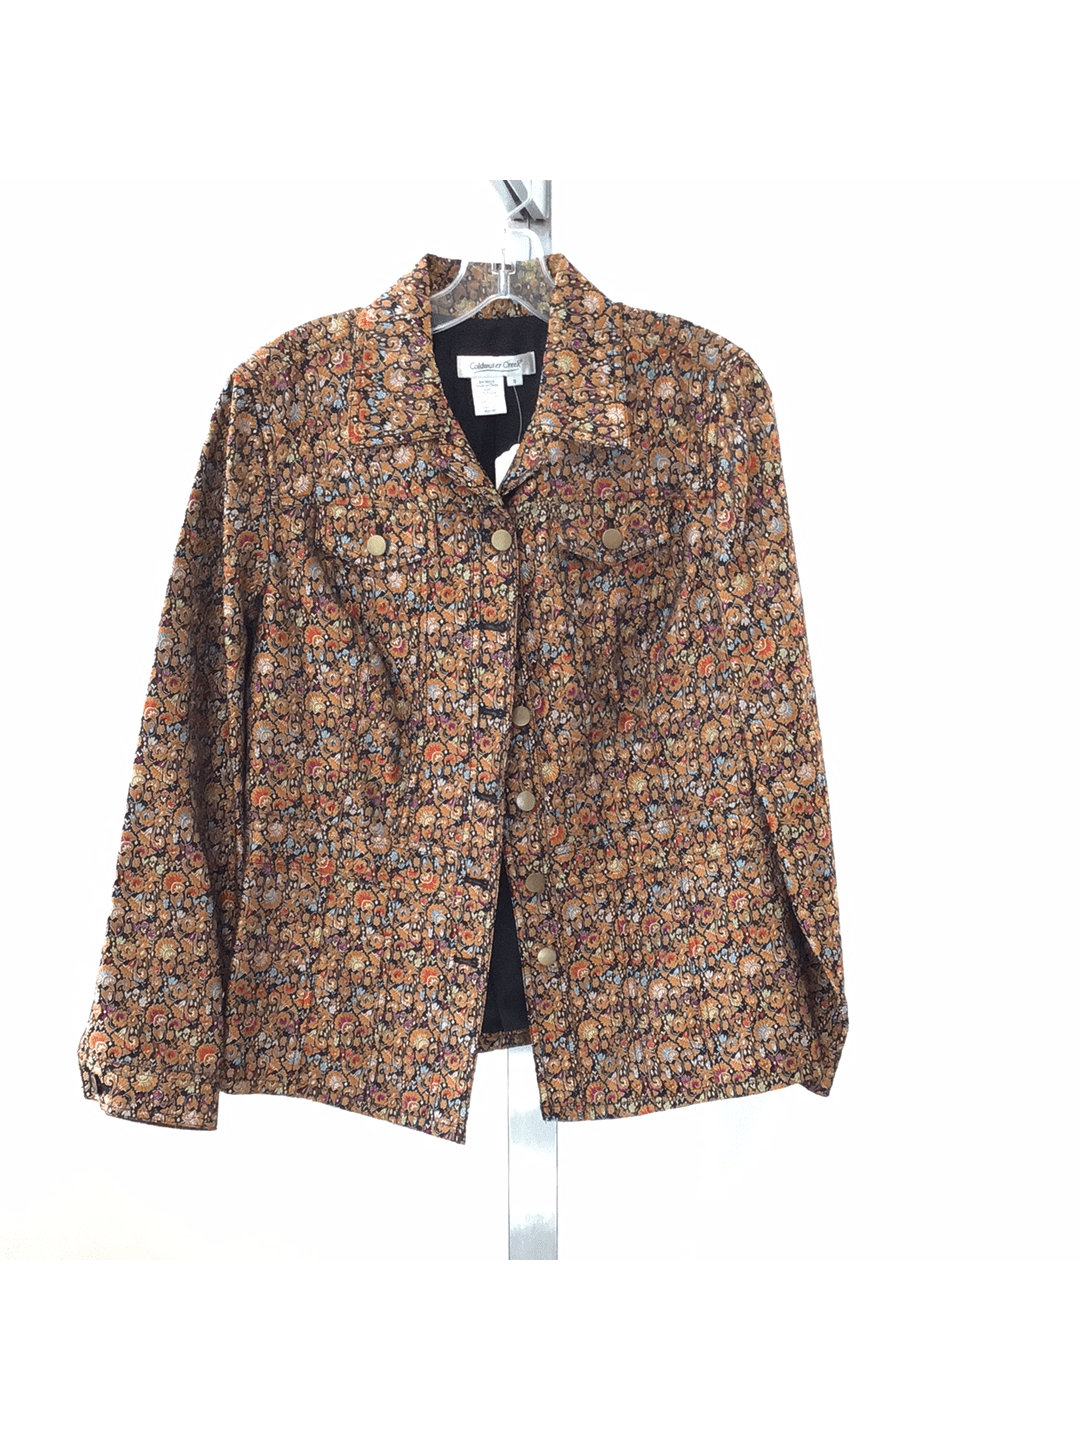 Coldwater Creek Ladies Multi-Colored  Jacket - Size S - The Kennedy Collective Thrift - 